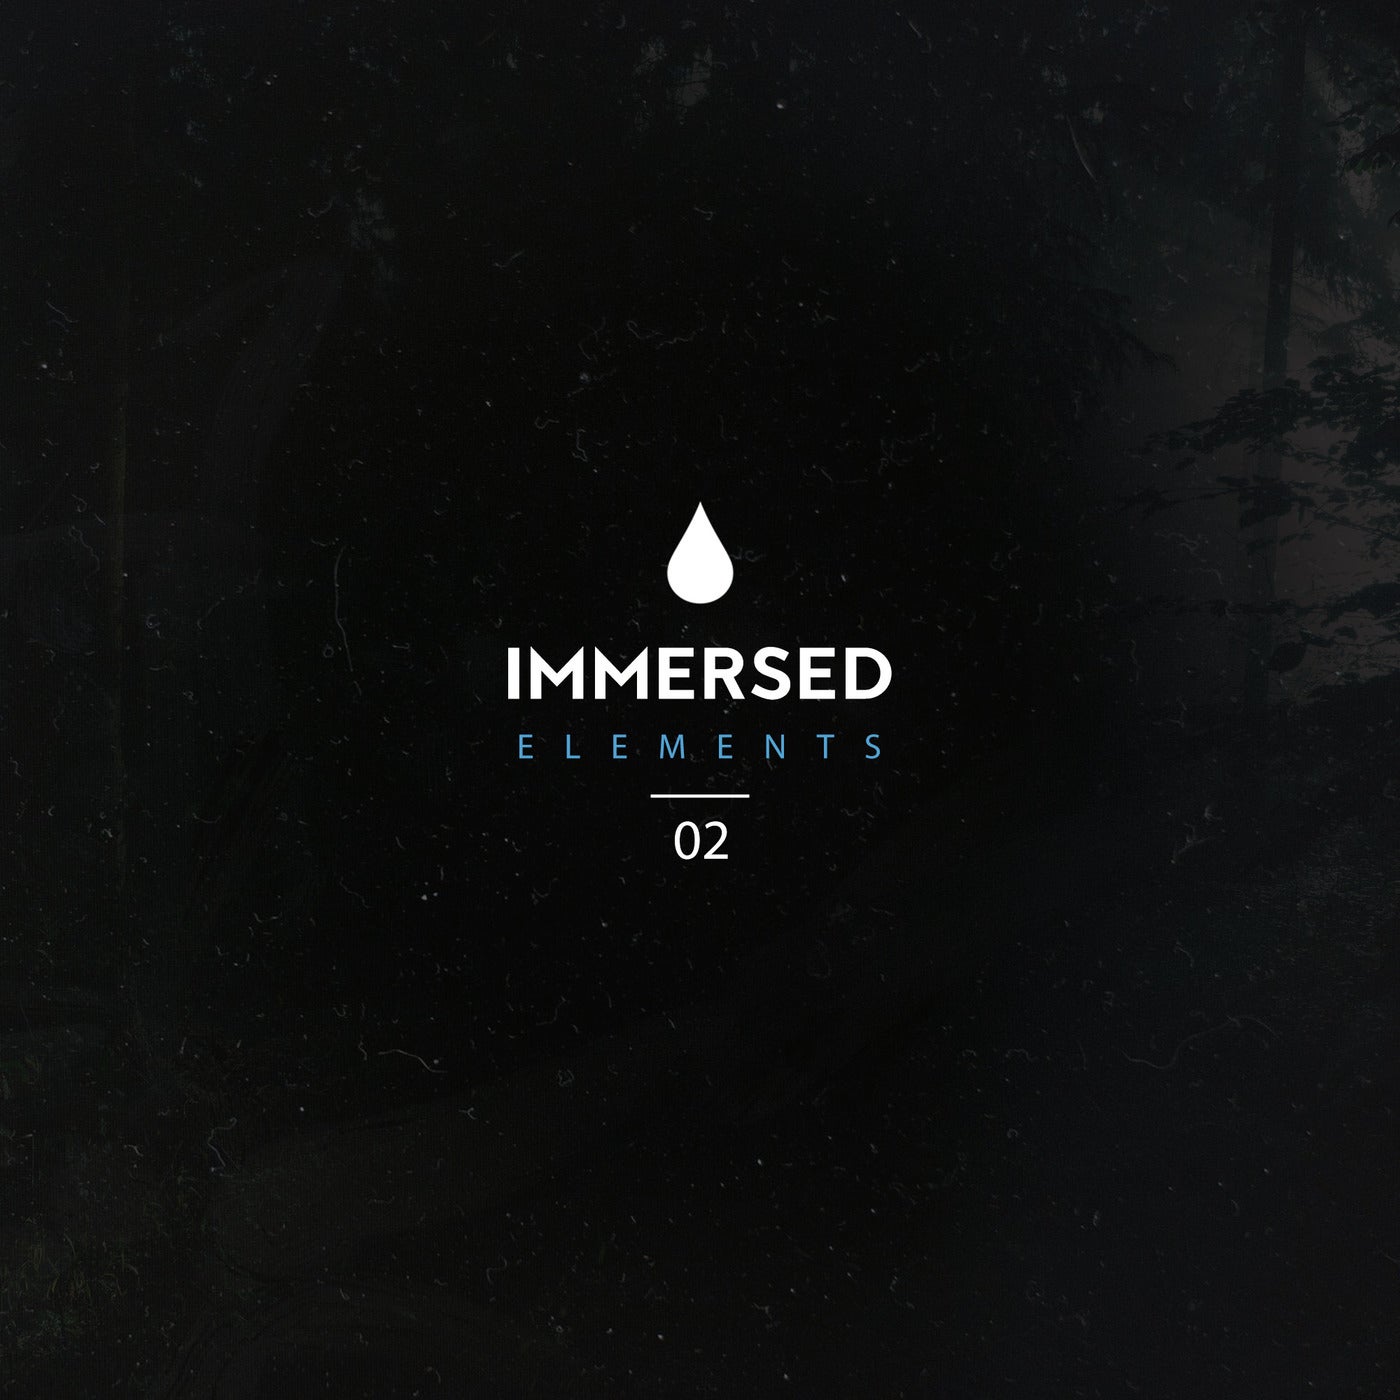 Immersed Elements 02